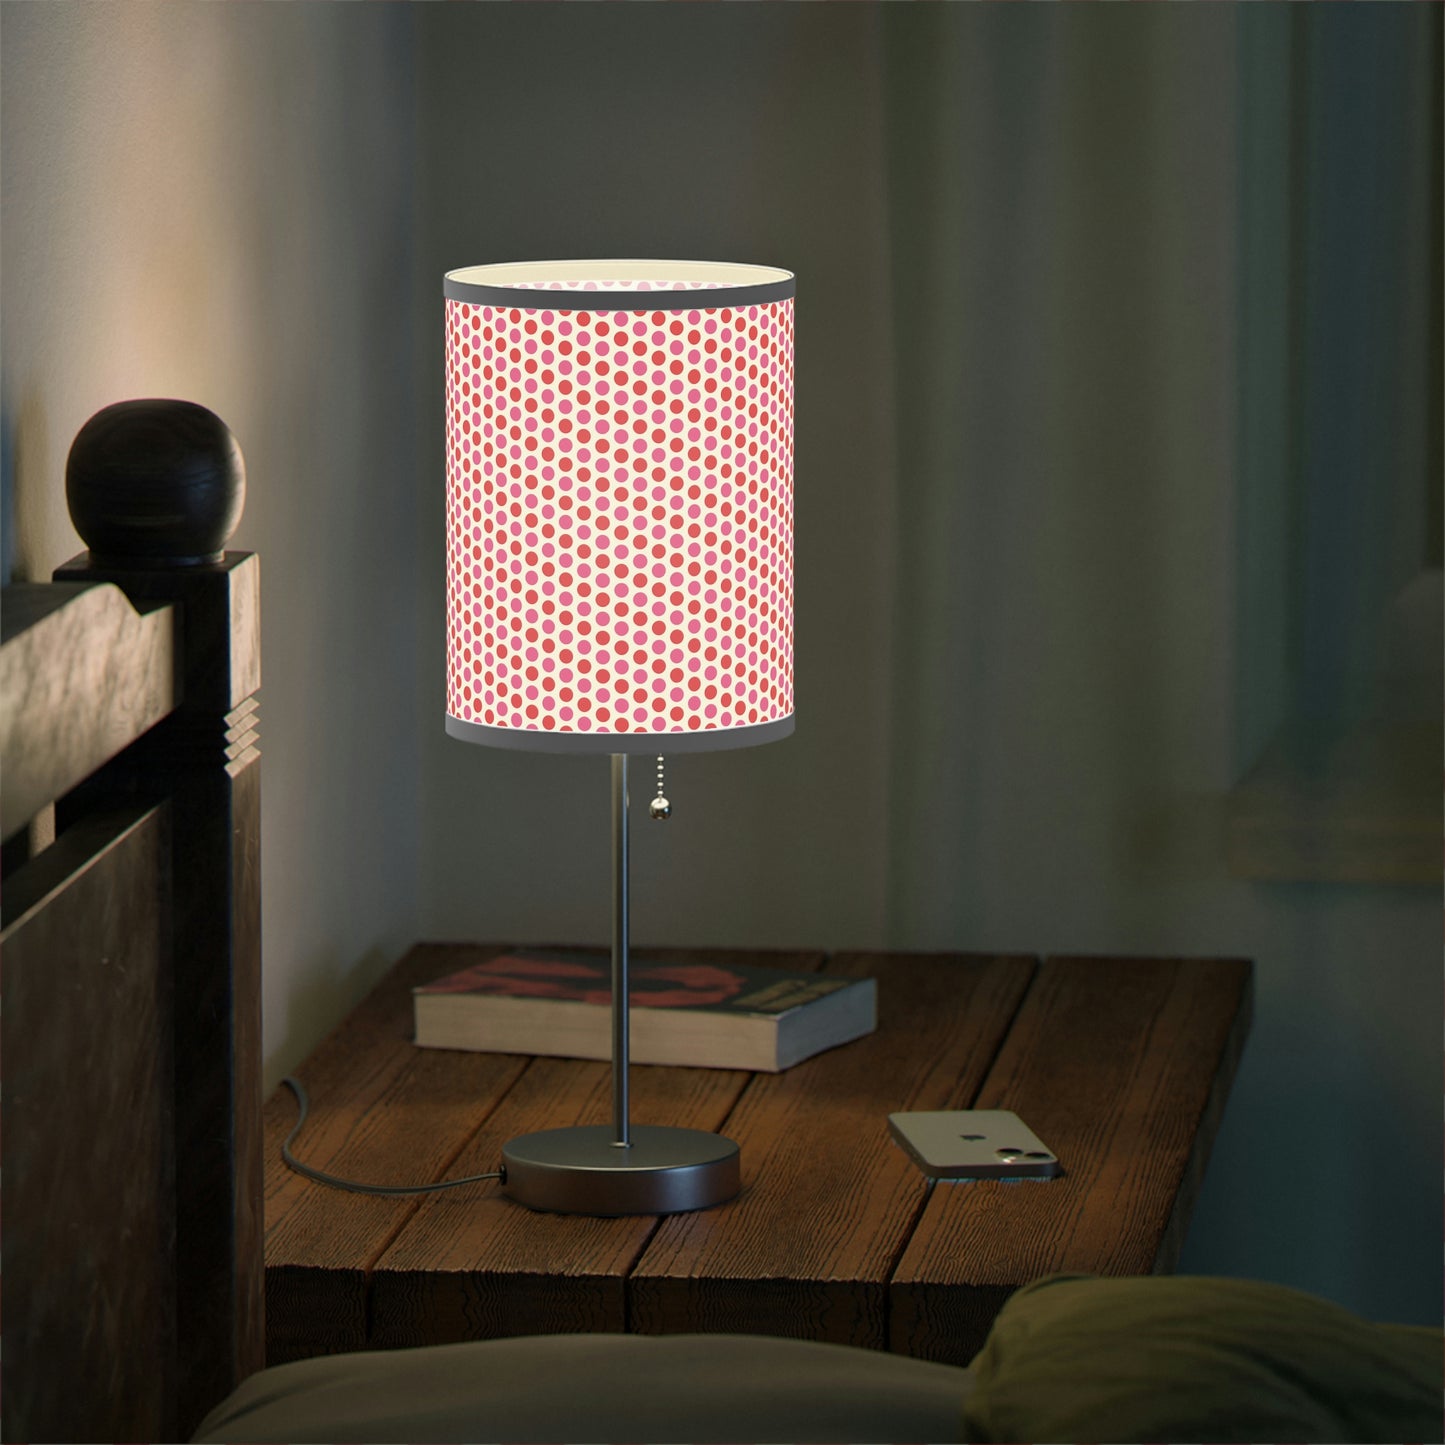 red and pink polkadot baby nursery lamp, pink and red nursery table lamp with polka dots